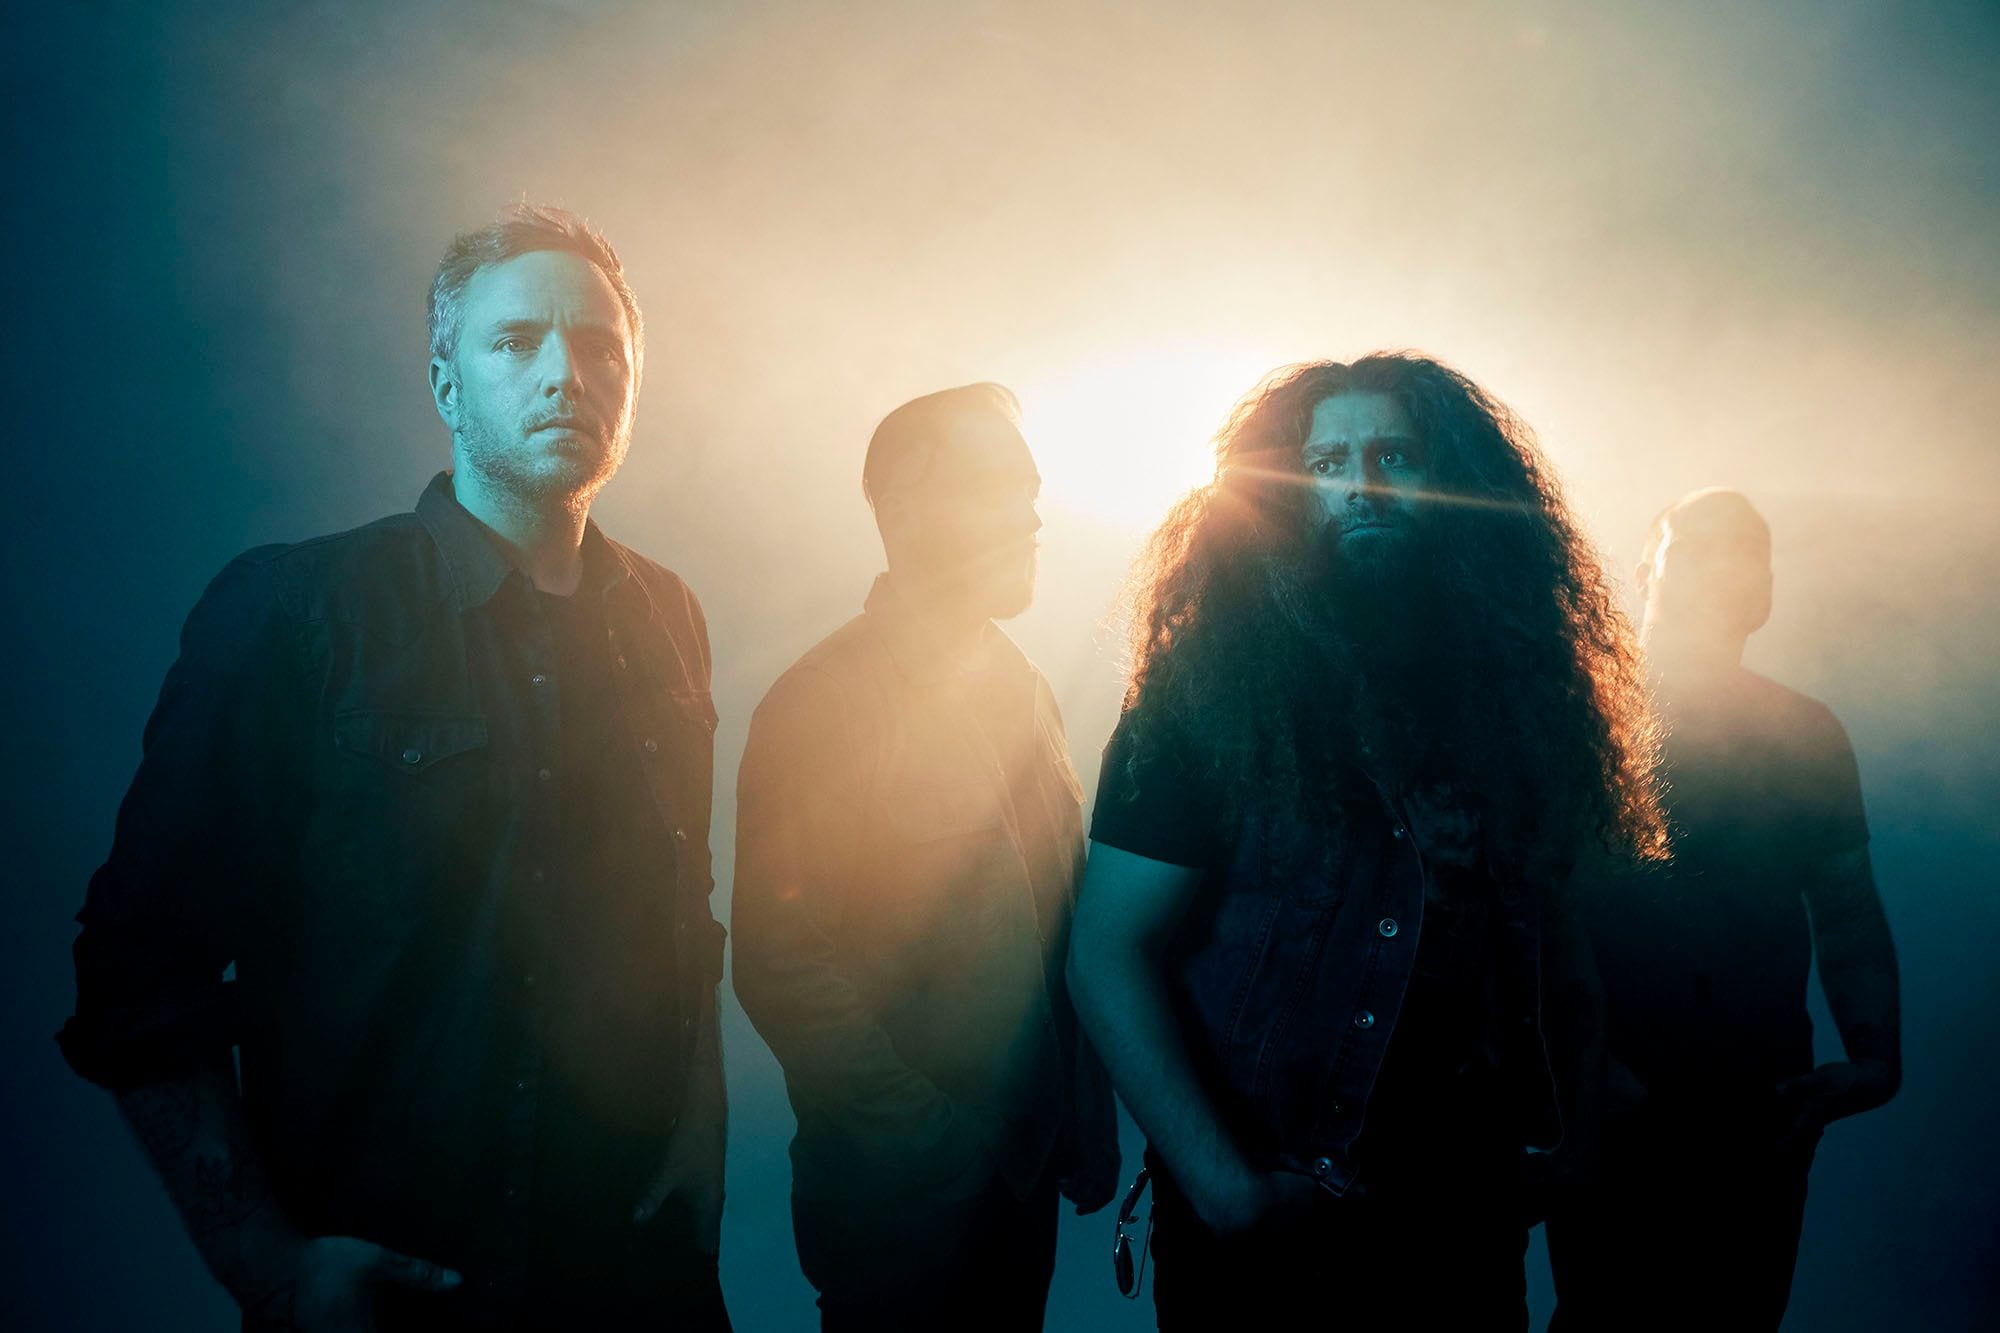 Coheed and Cambria Focus on Their Core Sound on ‘The Unheavenly Creatures’